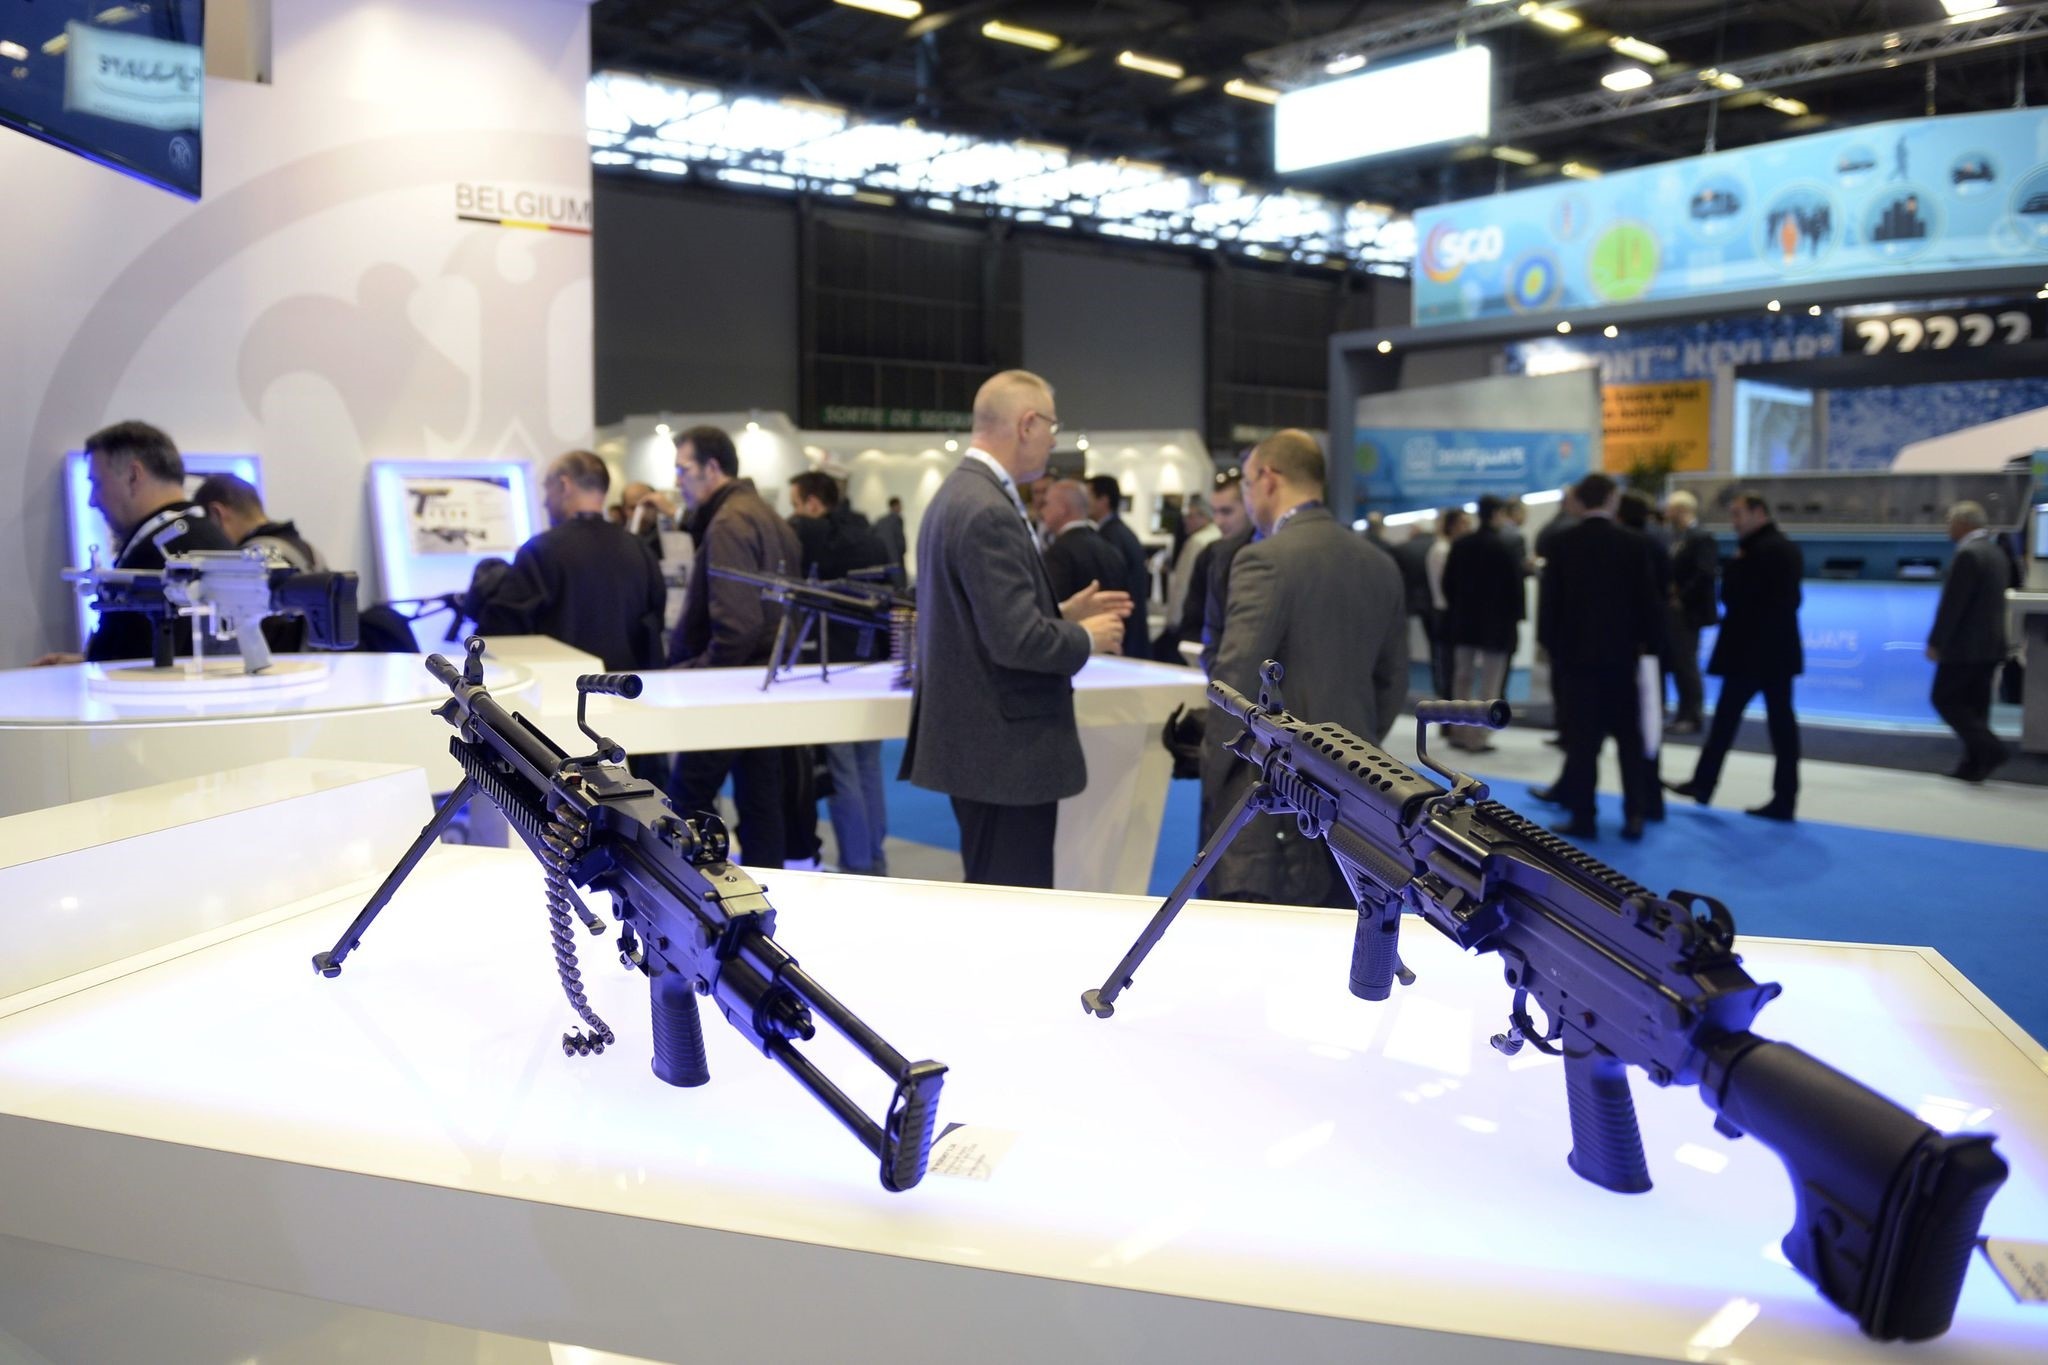 This file photo taken on November 19, 2013 shows weapons on display at the International Security Fair (MILIPOL) in Villepinte, outside Paris. (AFP Photo)